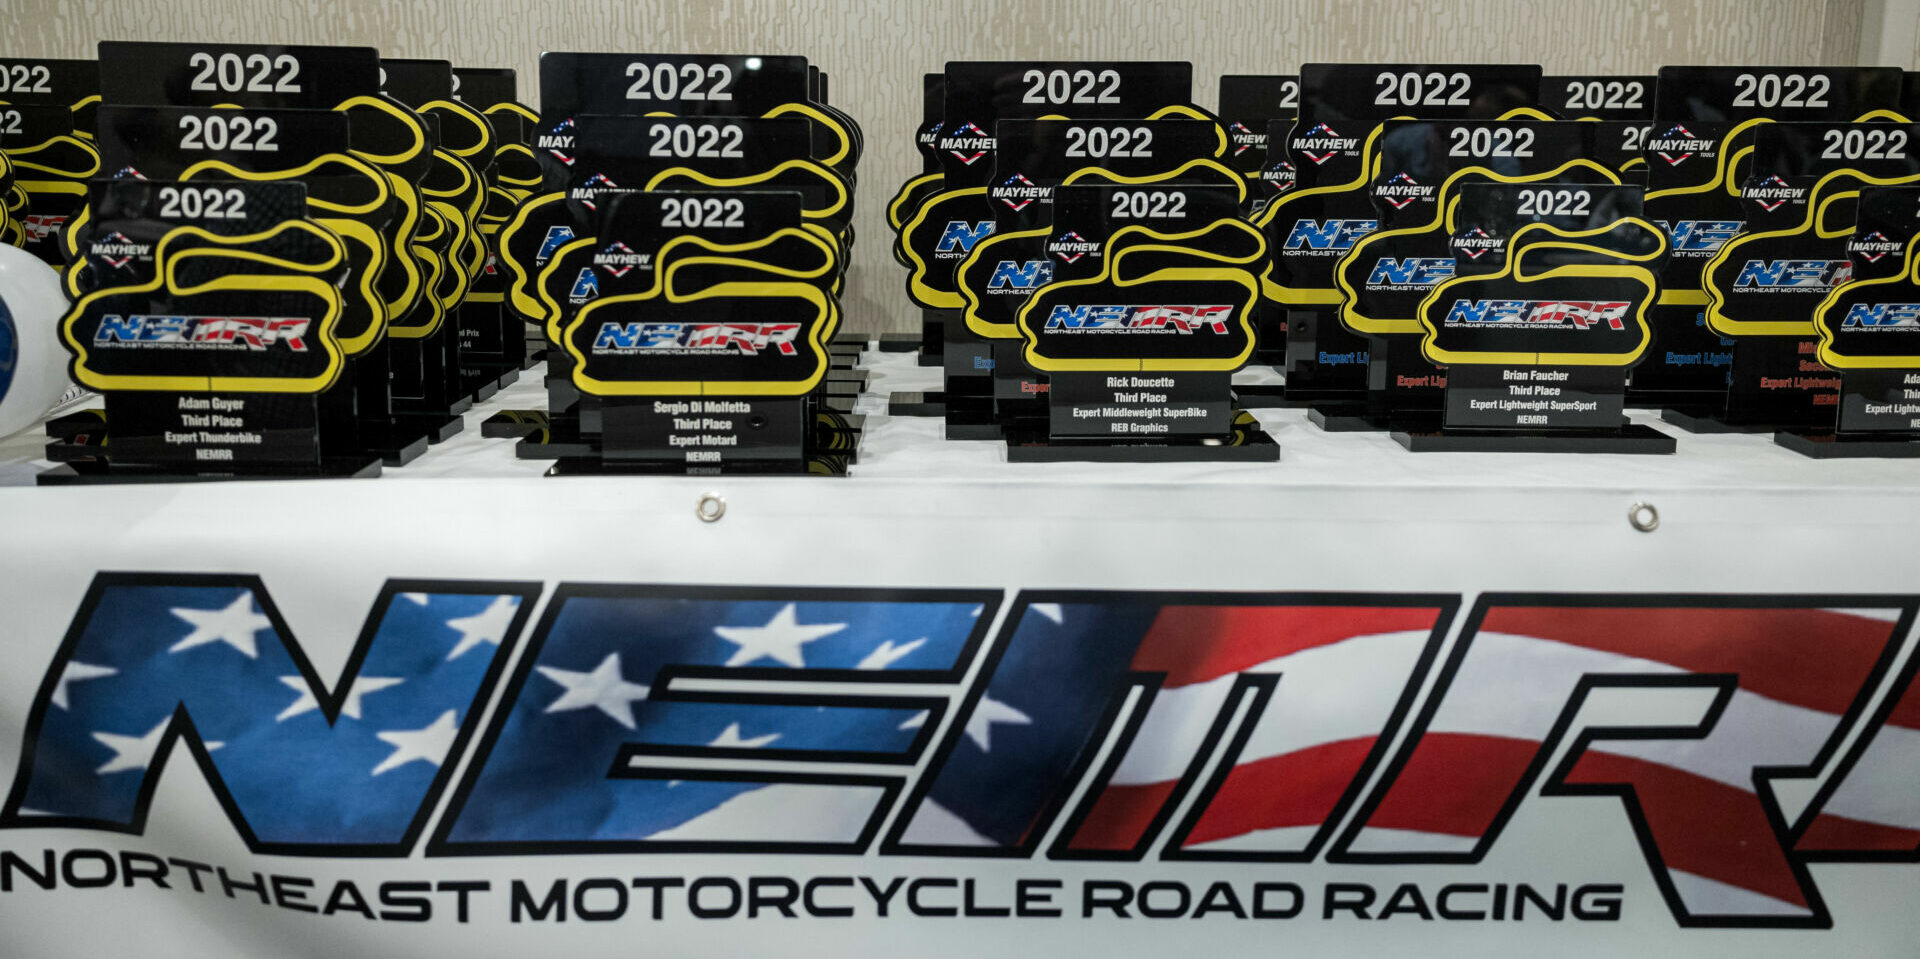 Awards from the 2022 NEMRR season ready to be handed out. Photo by Scott Hussey Photography, courtesy NEMRR.